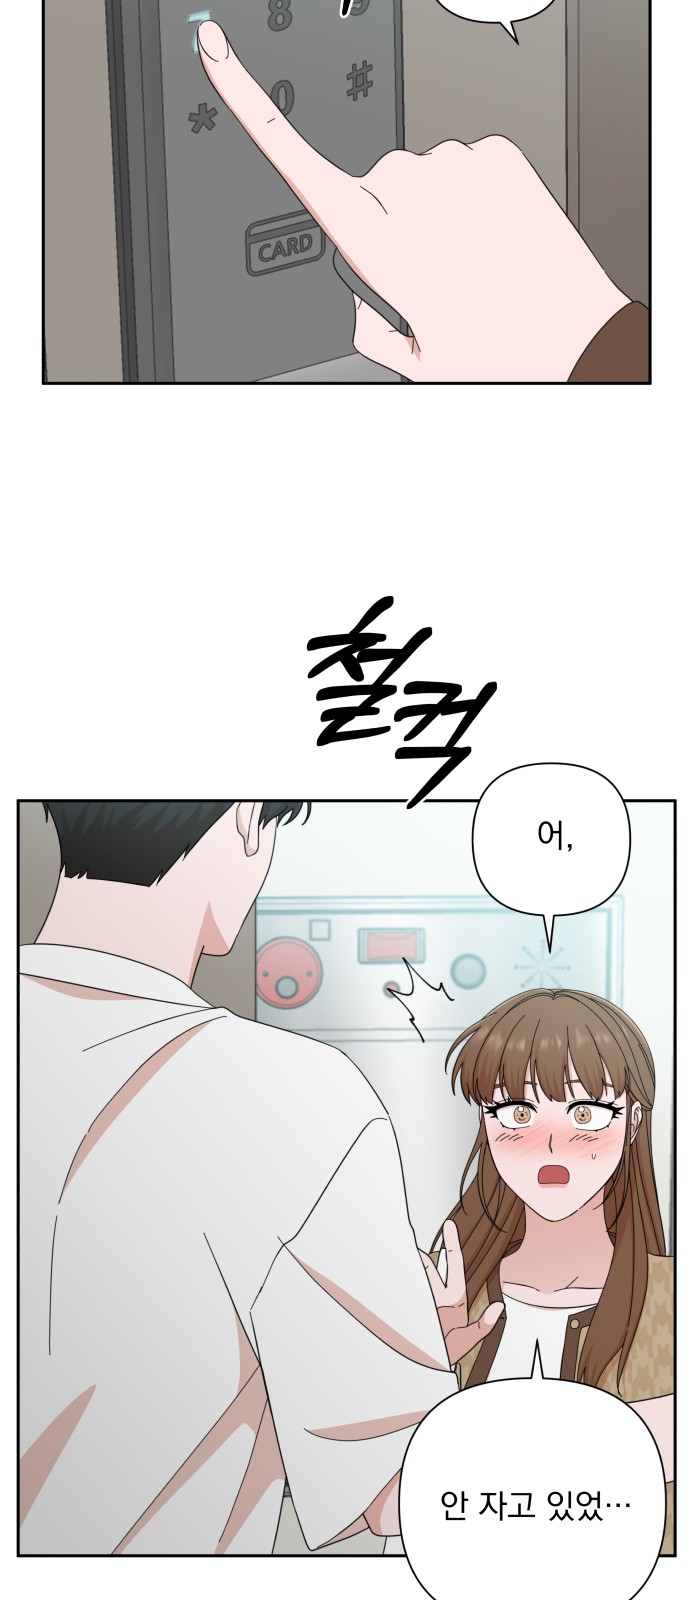 The Man With Pretty Lips - Chapter 47 - Page 2